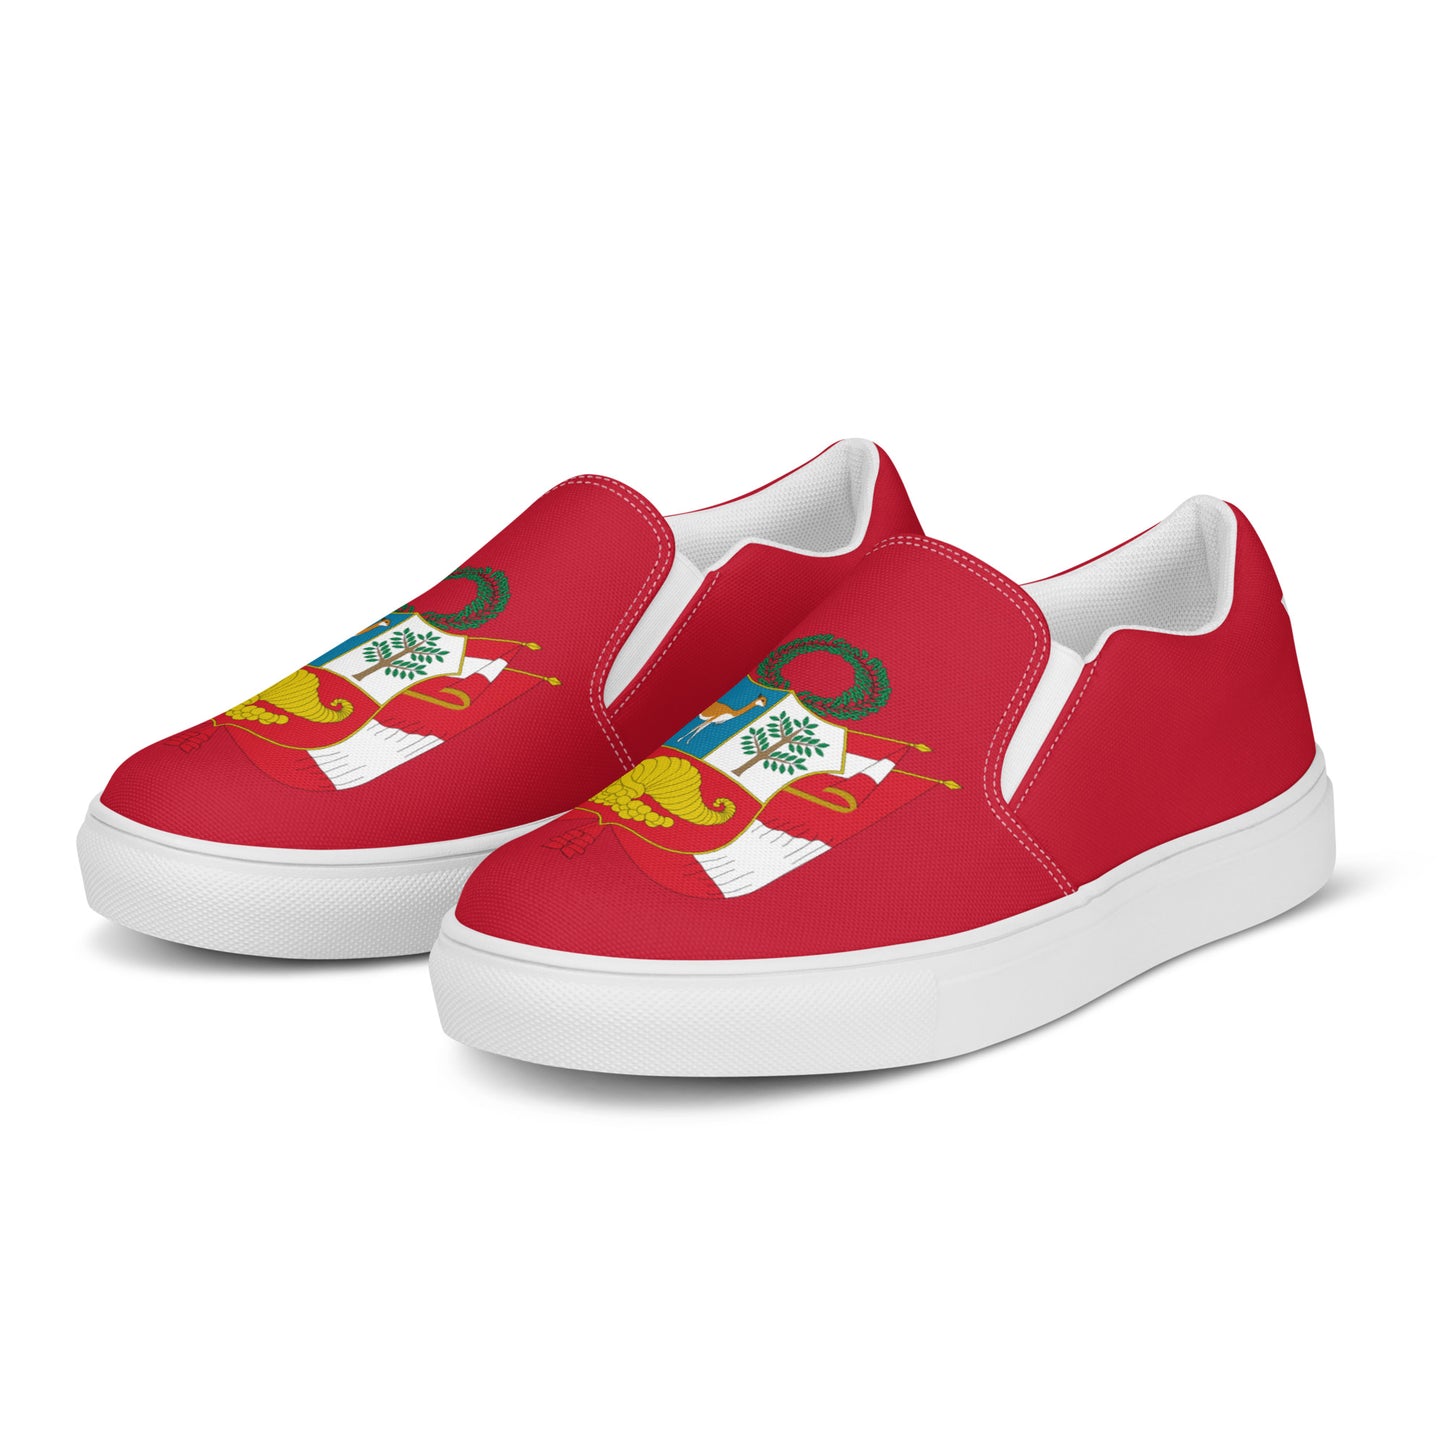 Perú - Women - Red - Slip-on shoes